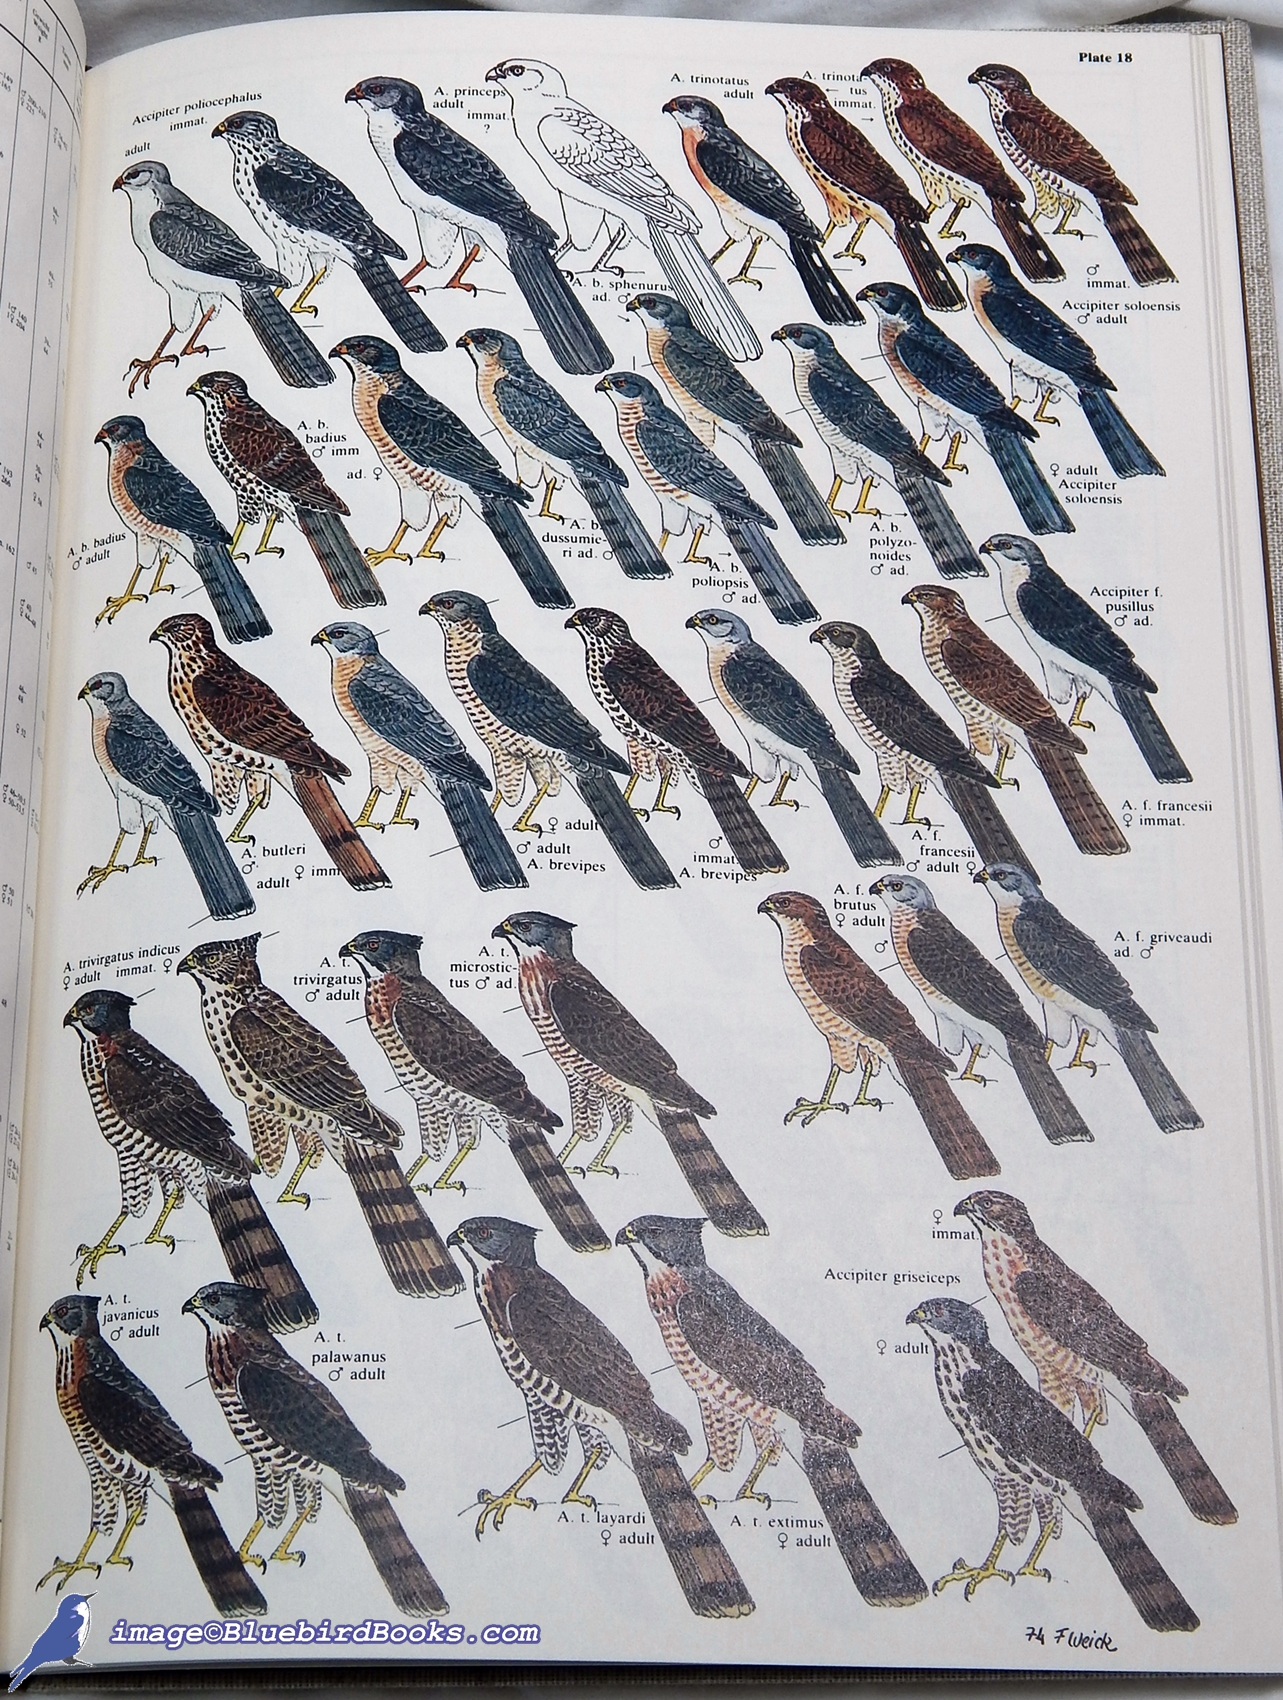 WEICK, FRIEDHELM (TEXT AND ART) - Birds of Prey of the World: A Coloured Guide to Identification of All the Diurnal Species, Order Falconiformes